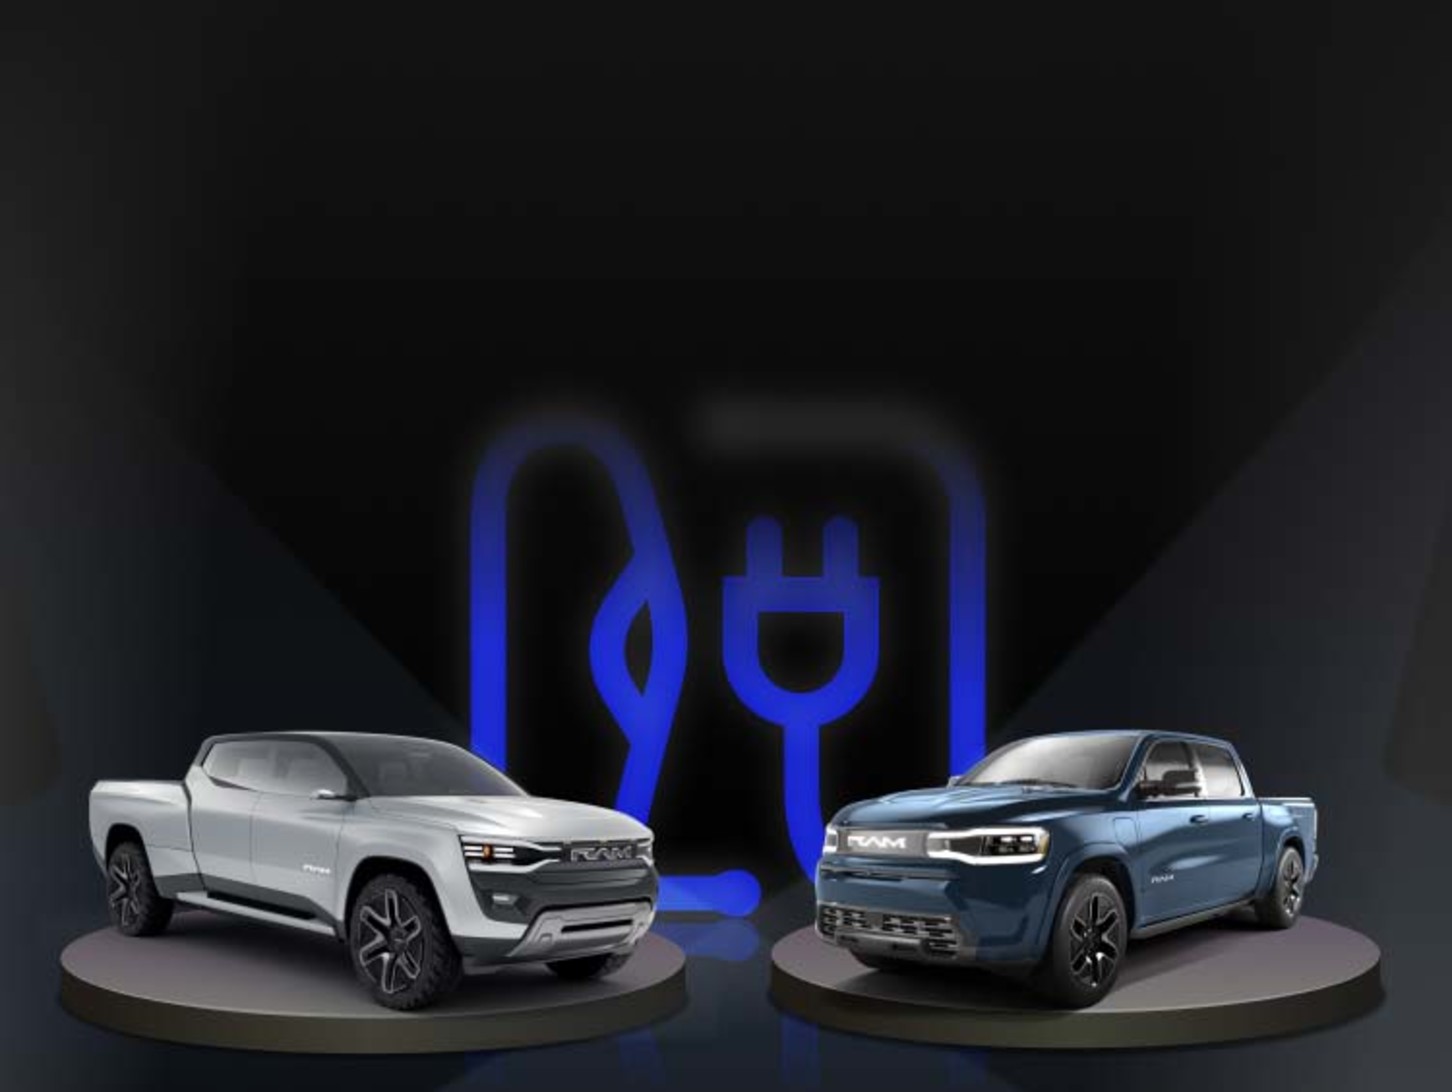 View of a Blue Ram 1500 REV and Silver Ram Revolution Concept model electric pickup truck. against a black background.